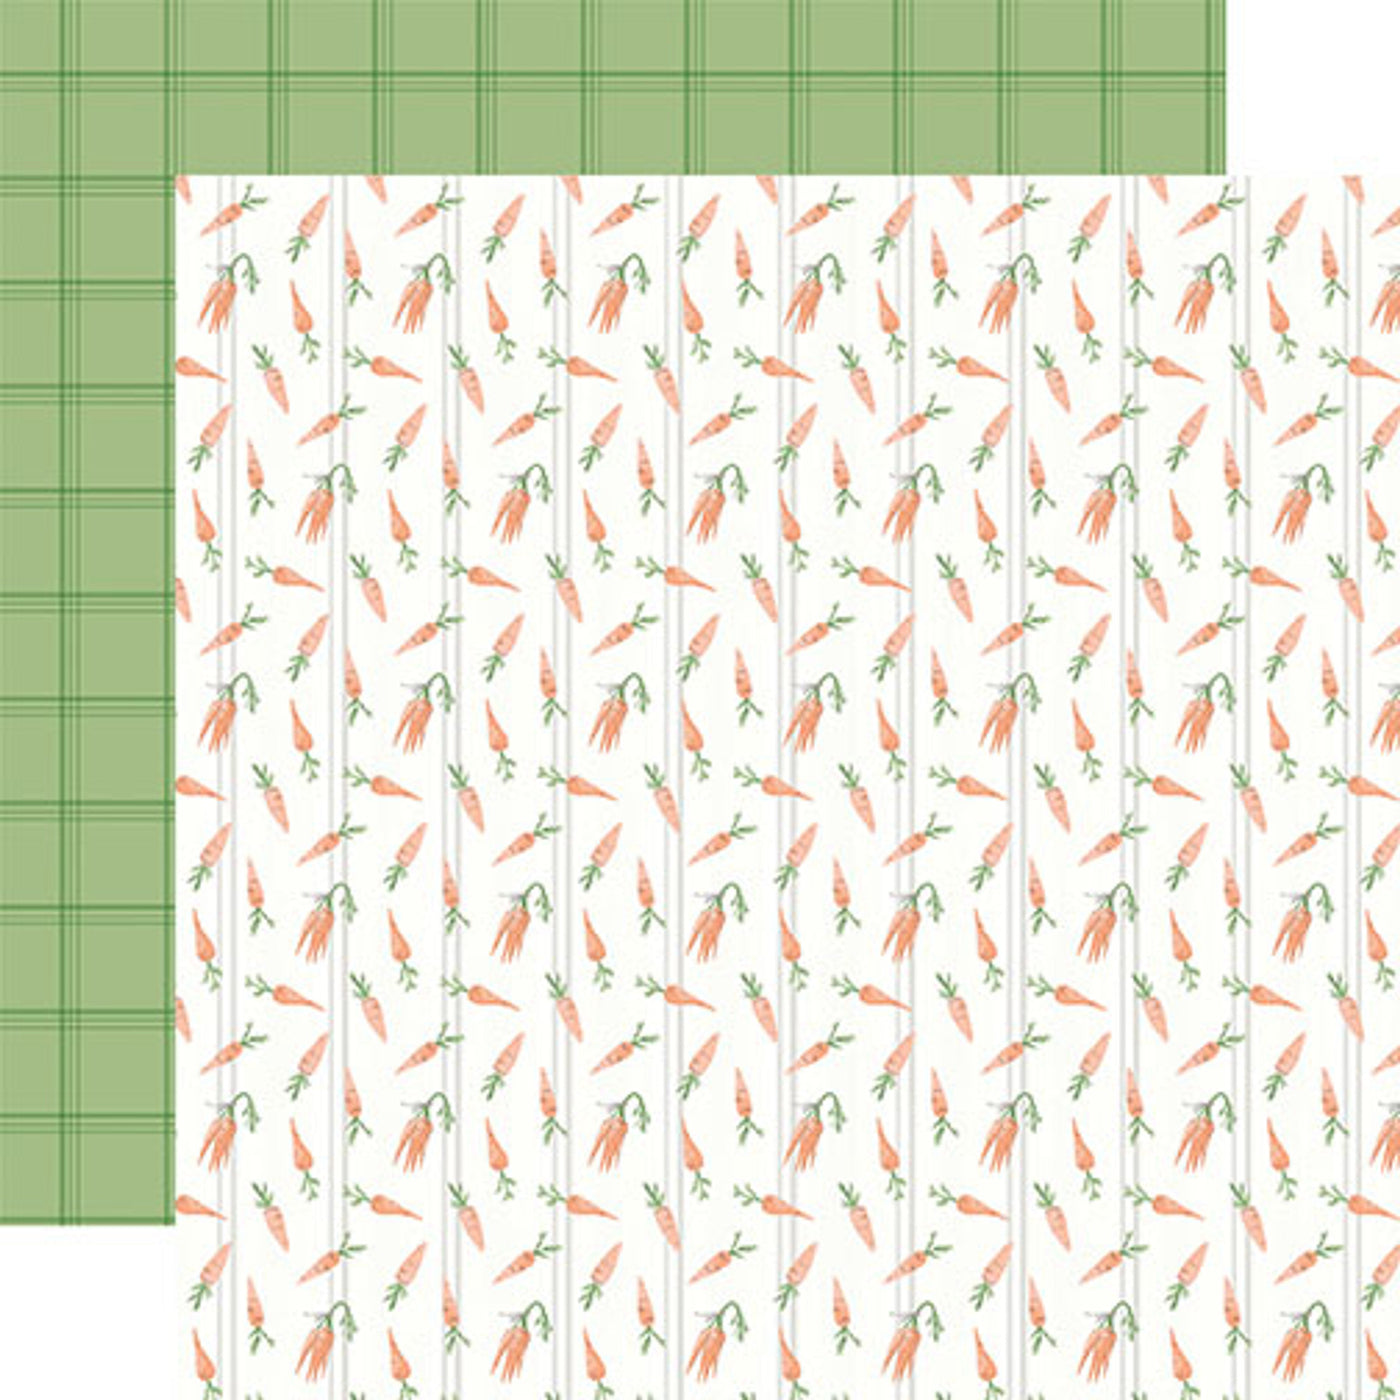 12x12 double-sided patterned paper - (carrots all over on a white beadboard background, green plaid on a green background reverse) - from Carta Bella Paper